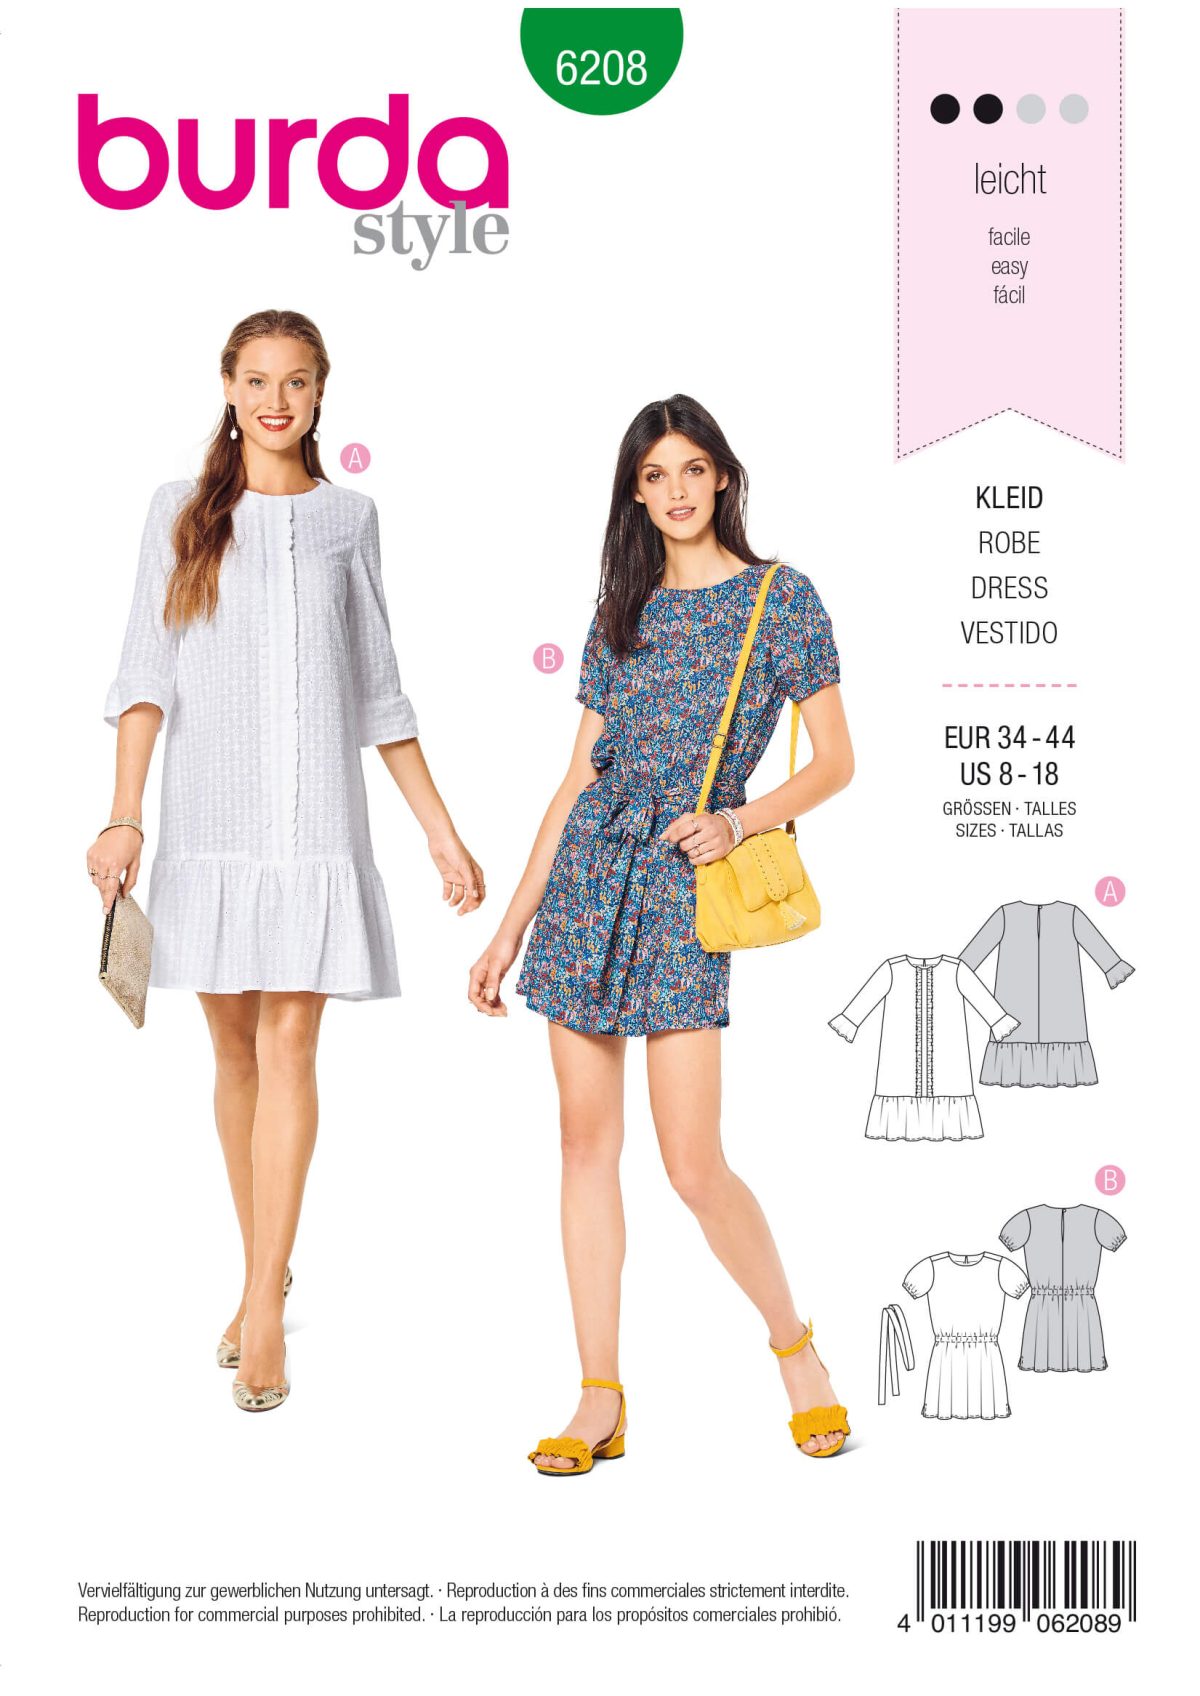 Burda Style Pattern 6208 Misses' Pull-On Dresses With Length Variations